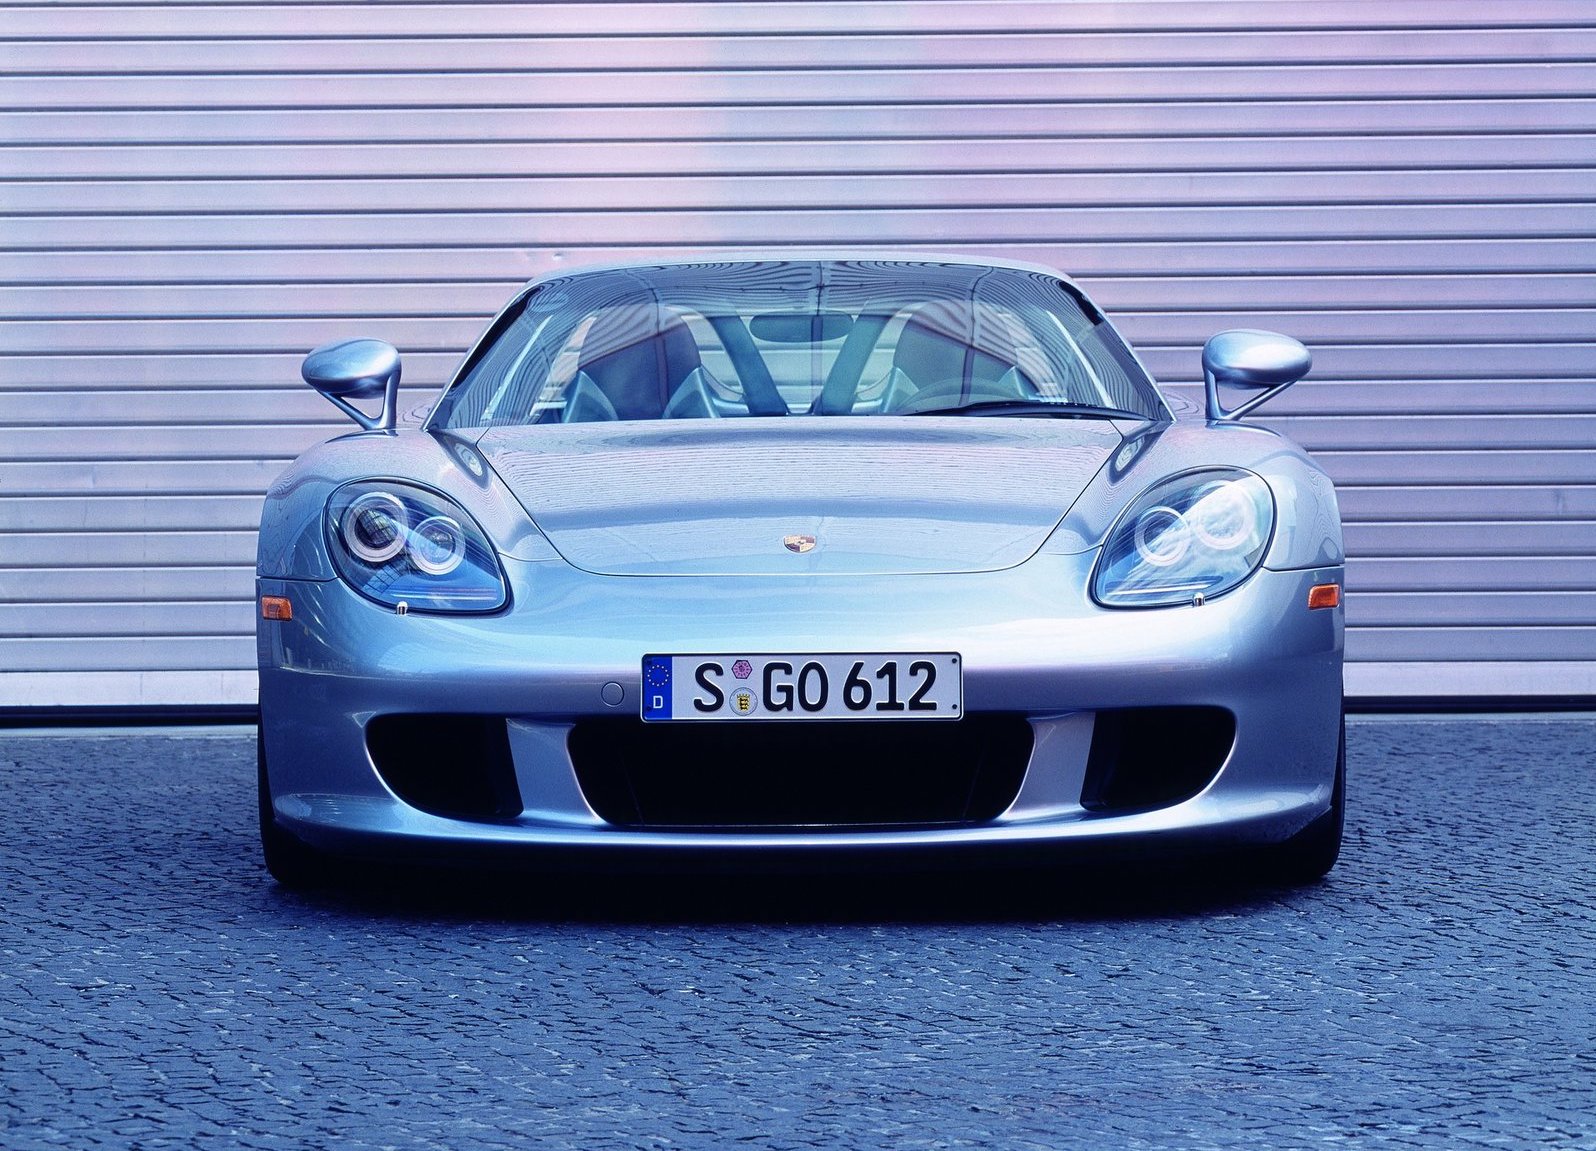 An image of a Porsche Carrera GT parked outside.